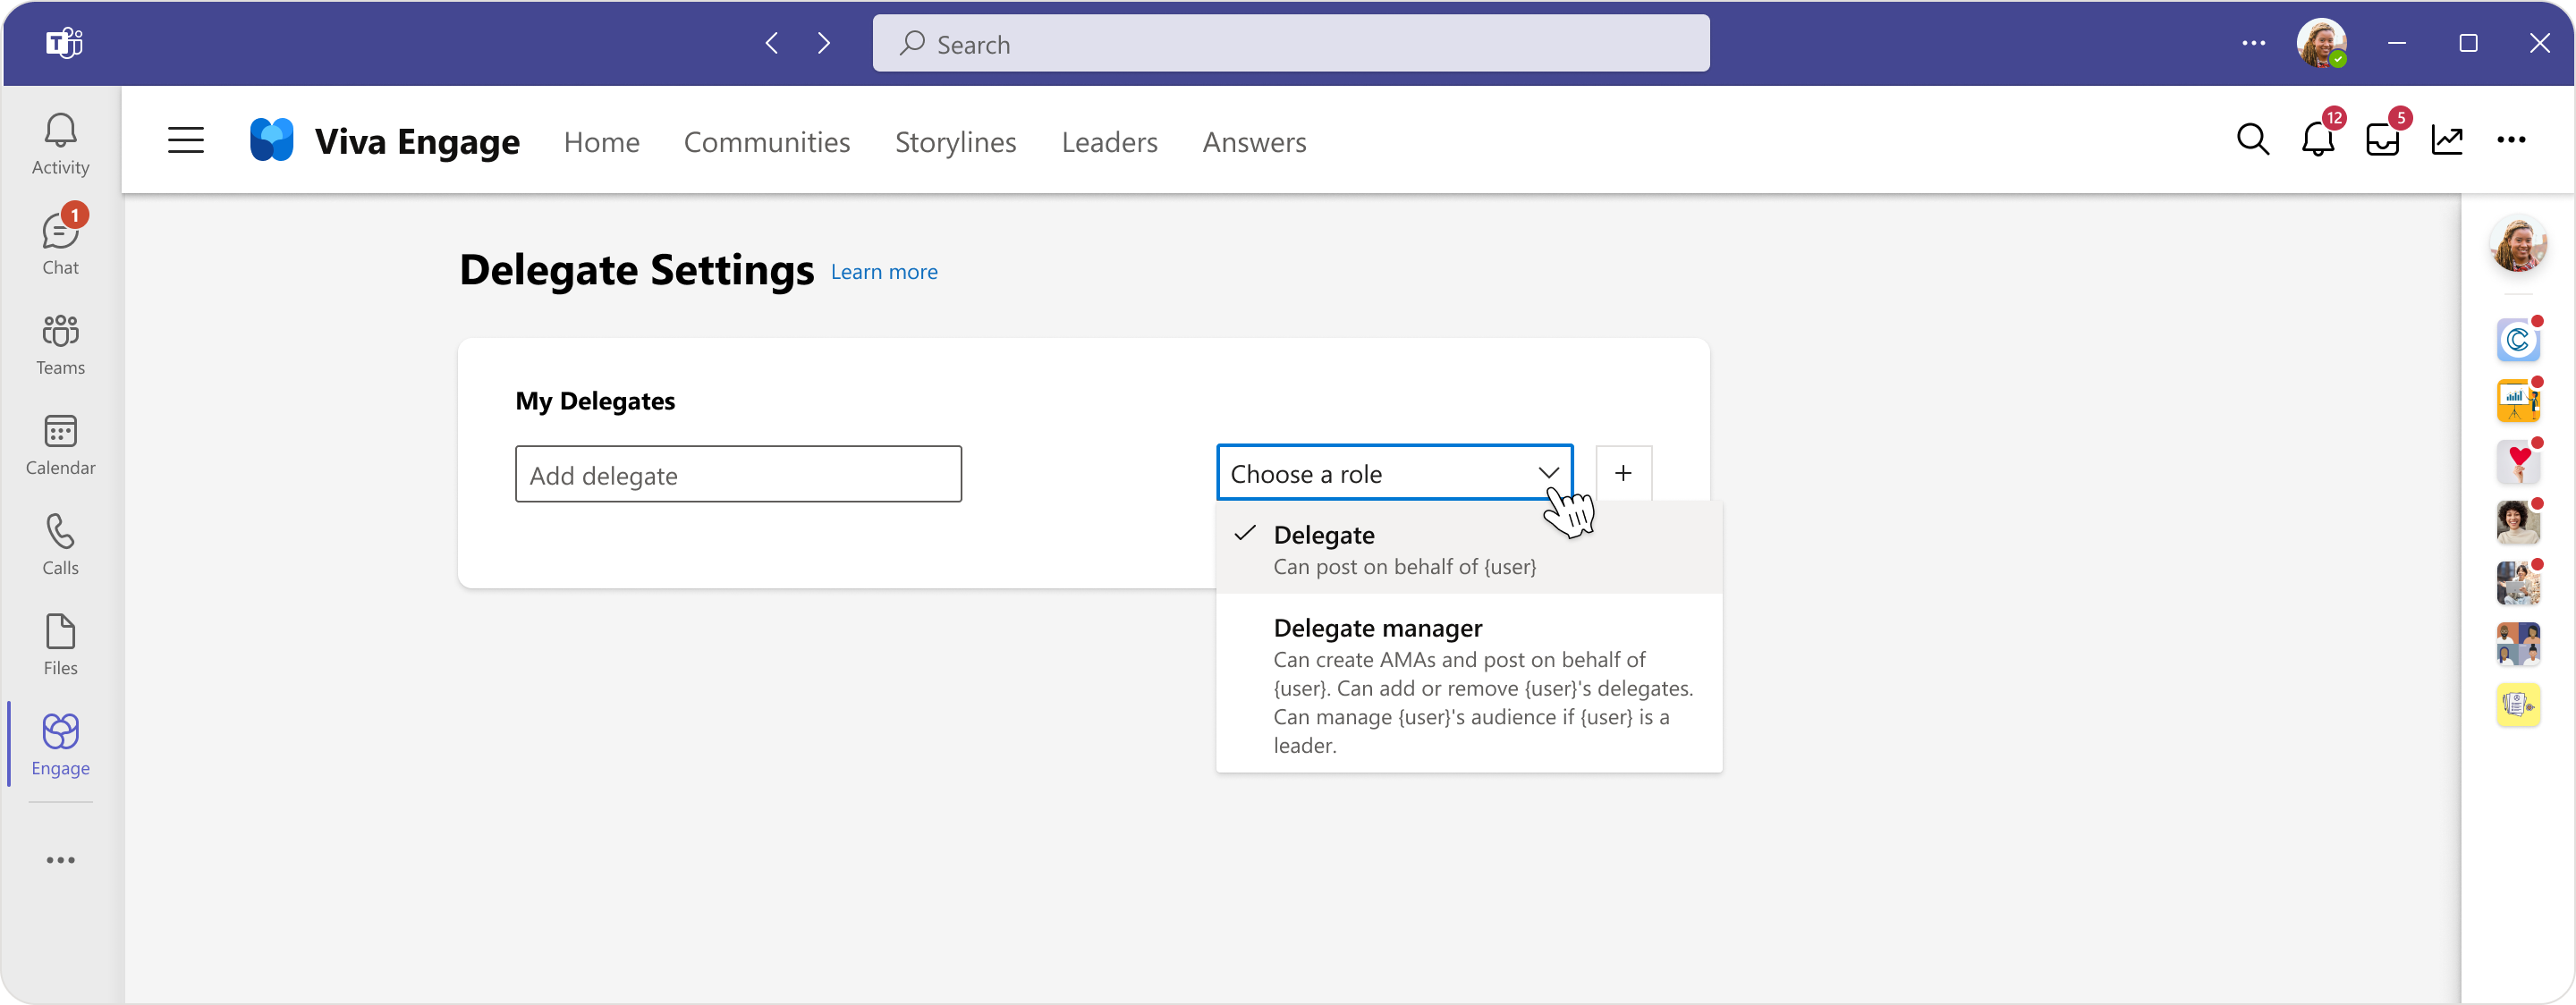 Image of the interface for Delegate Settings